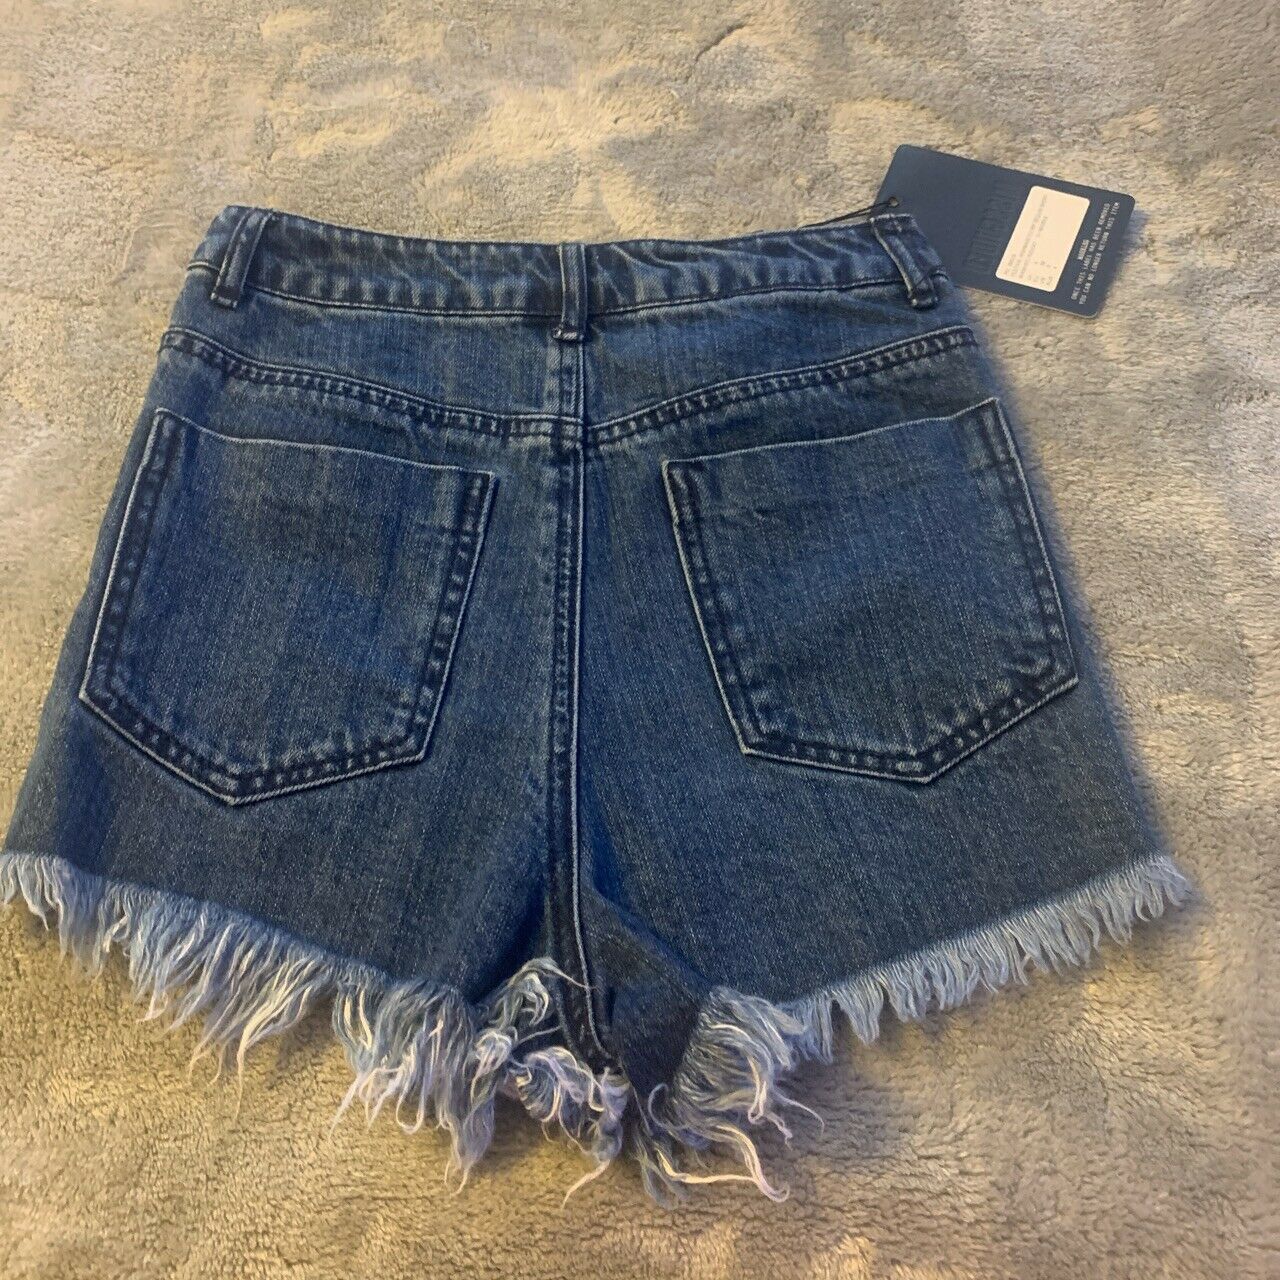 Primary image for Size 0 Missguided Sequined Denim Shorts Festival Highwaisted Rip Distressed New